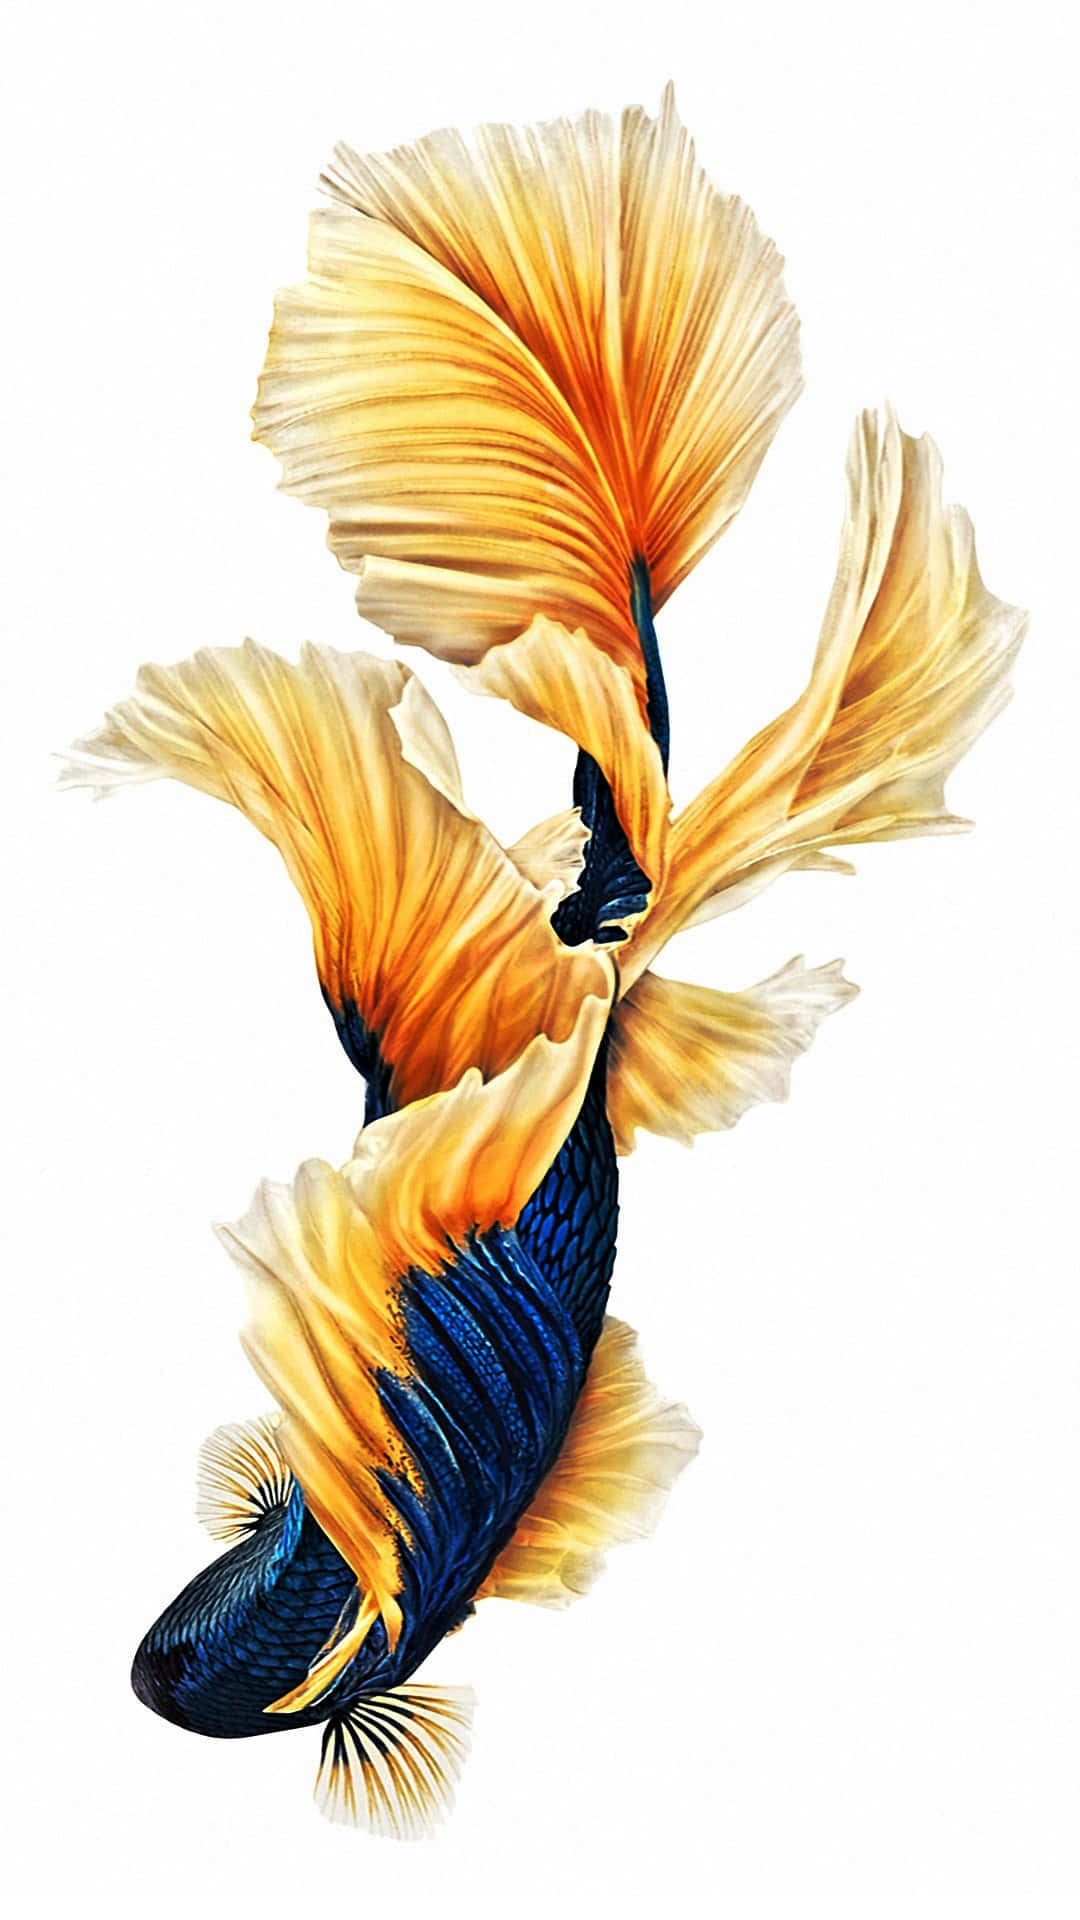 Blue Fish For Iphone 6 Plus Wallpaper